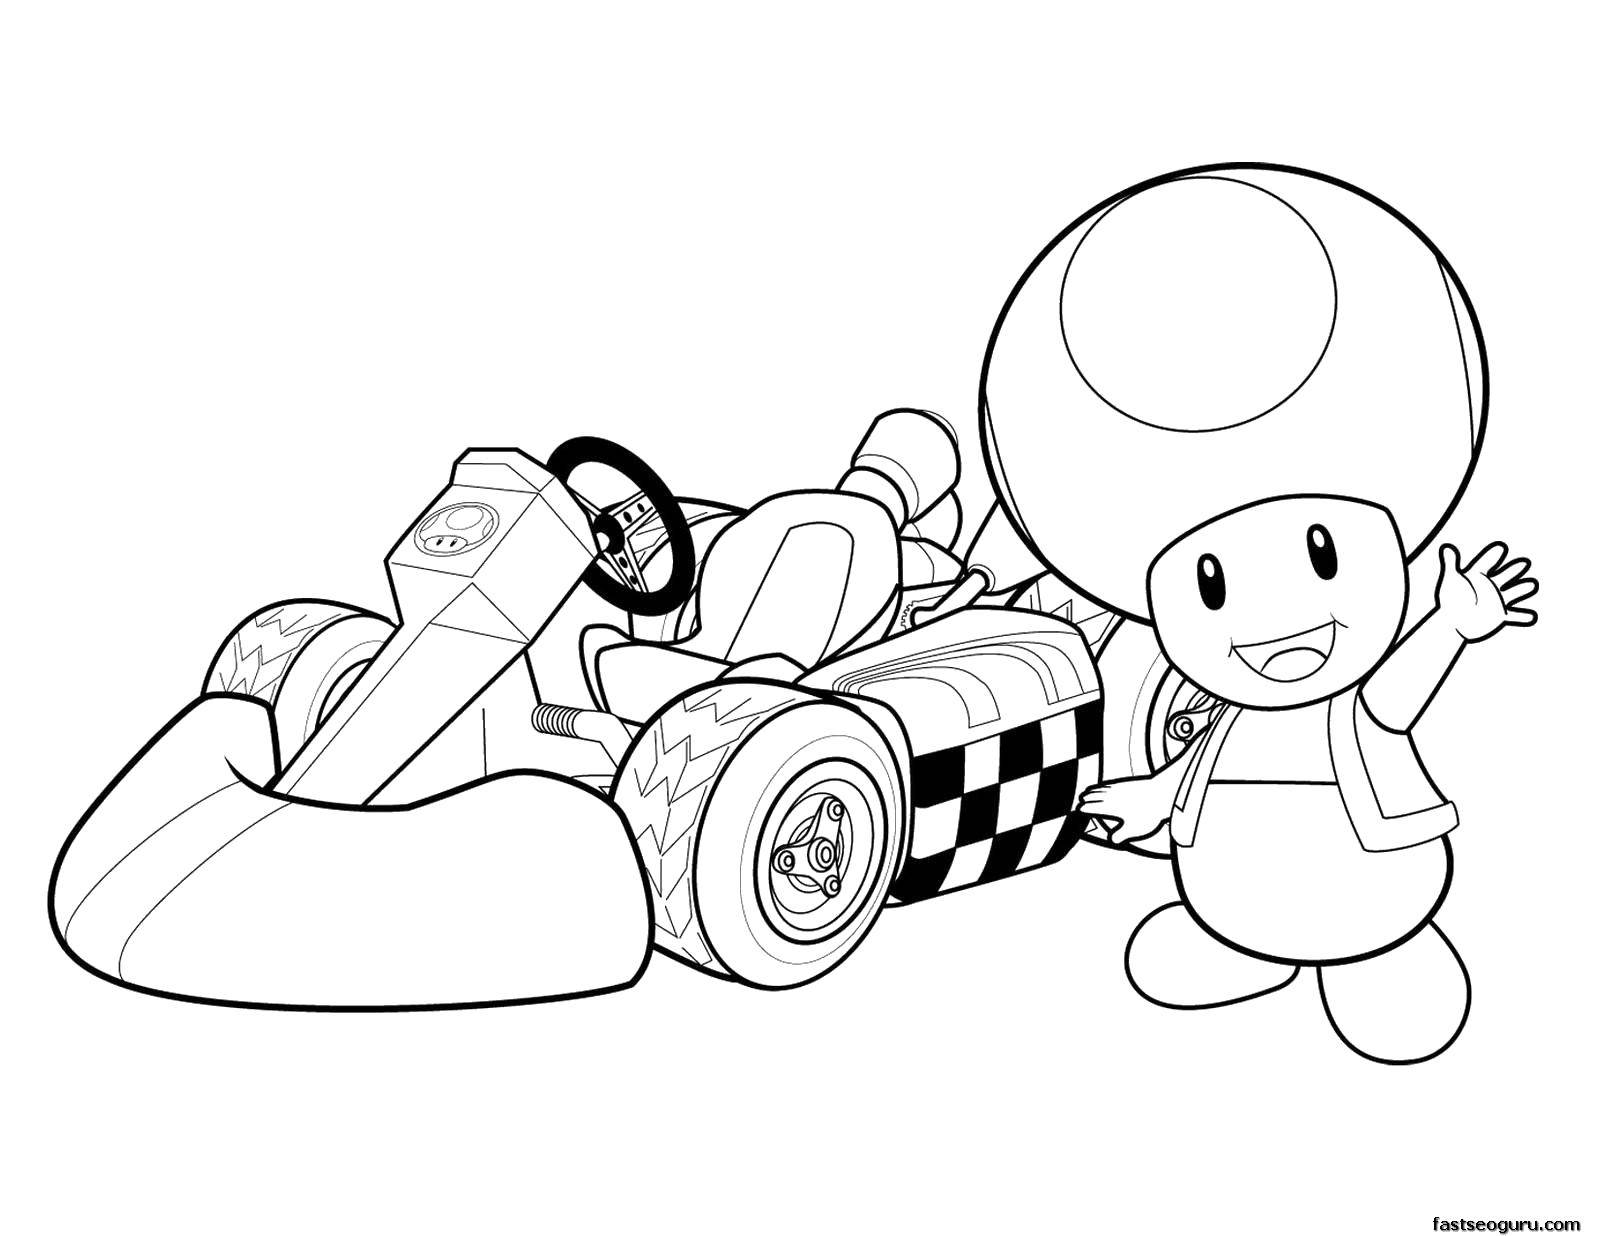 Coloring Mushroom racer. Category games. Tags:  Games, Mario.